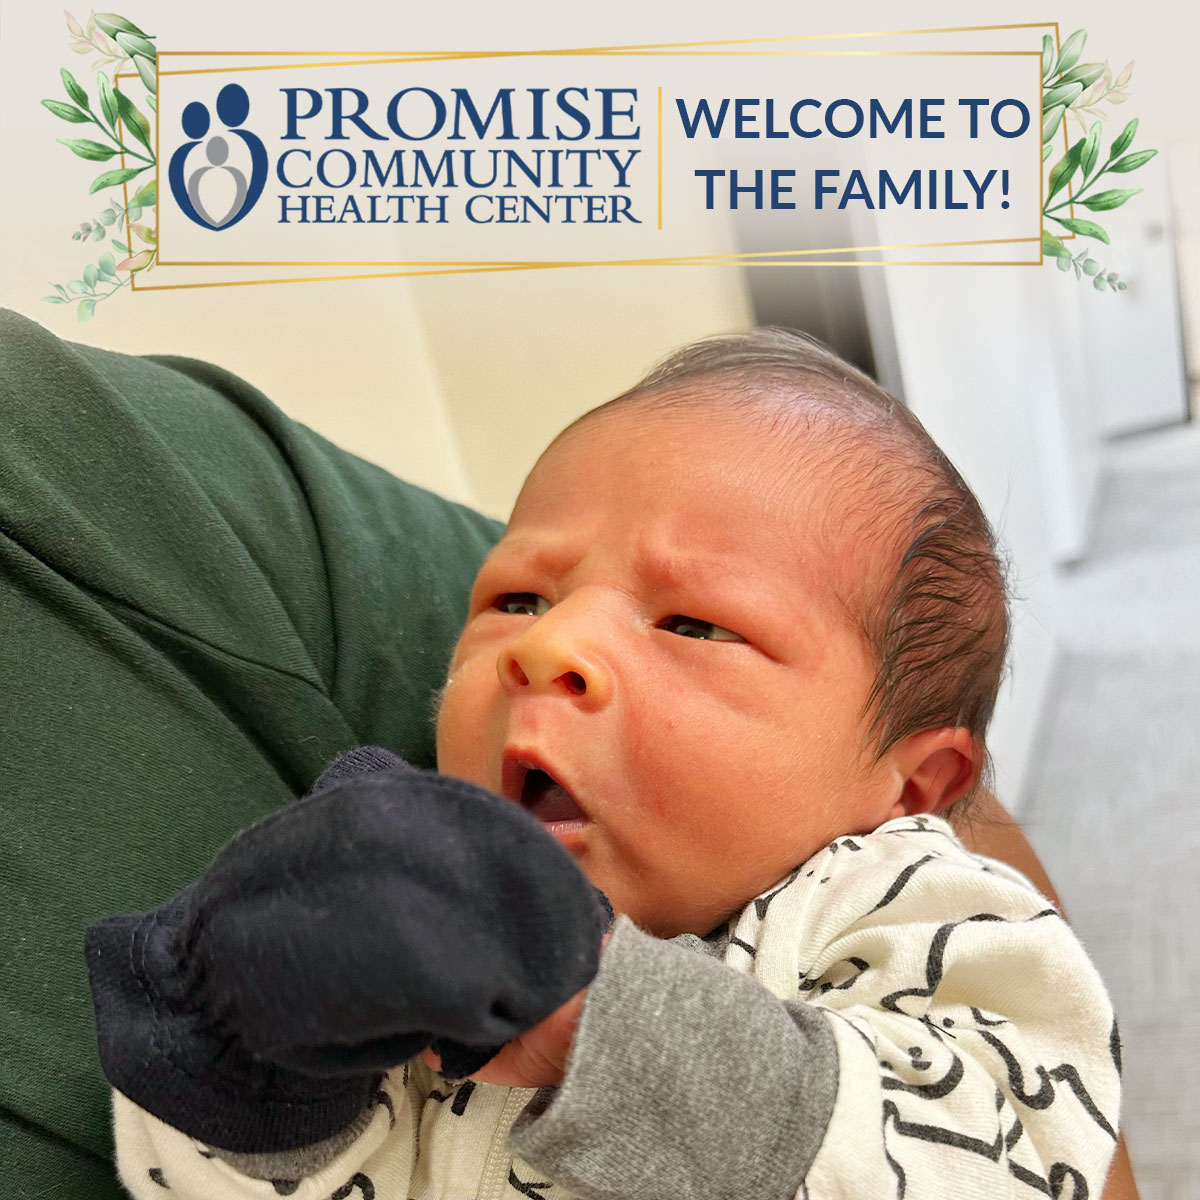 Home birth in Sioux City | Promise Community Health Center in Sioux Center, Iowa | Midwives in northwest Iowa, Midwives in southeast South Dakota, Midwives in southwest Minnesota | Midwives in Sioux Falls South Dakota, Midwives in Beresford South Dakota, Midwives in Sioux City IA, Midwives in LeMars IA, Midwives in Worthington MN, Midwives in Iowa, Midwives in South Dakota, Midwives in Minnesota